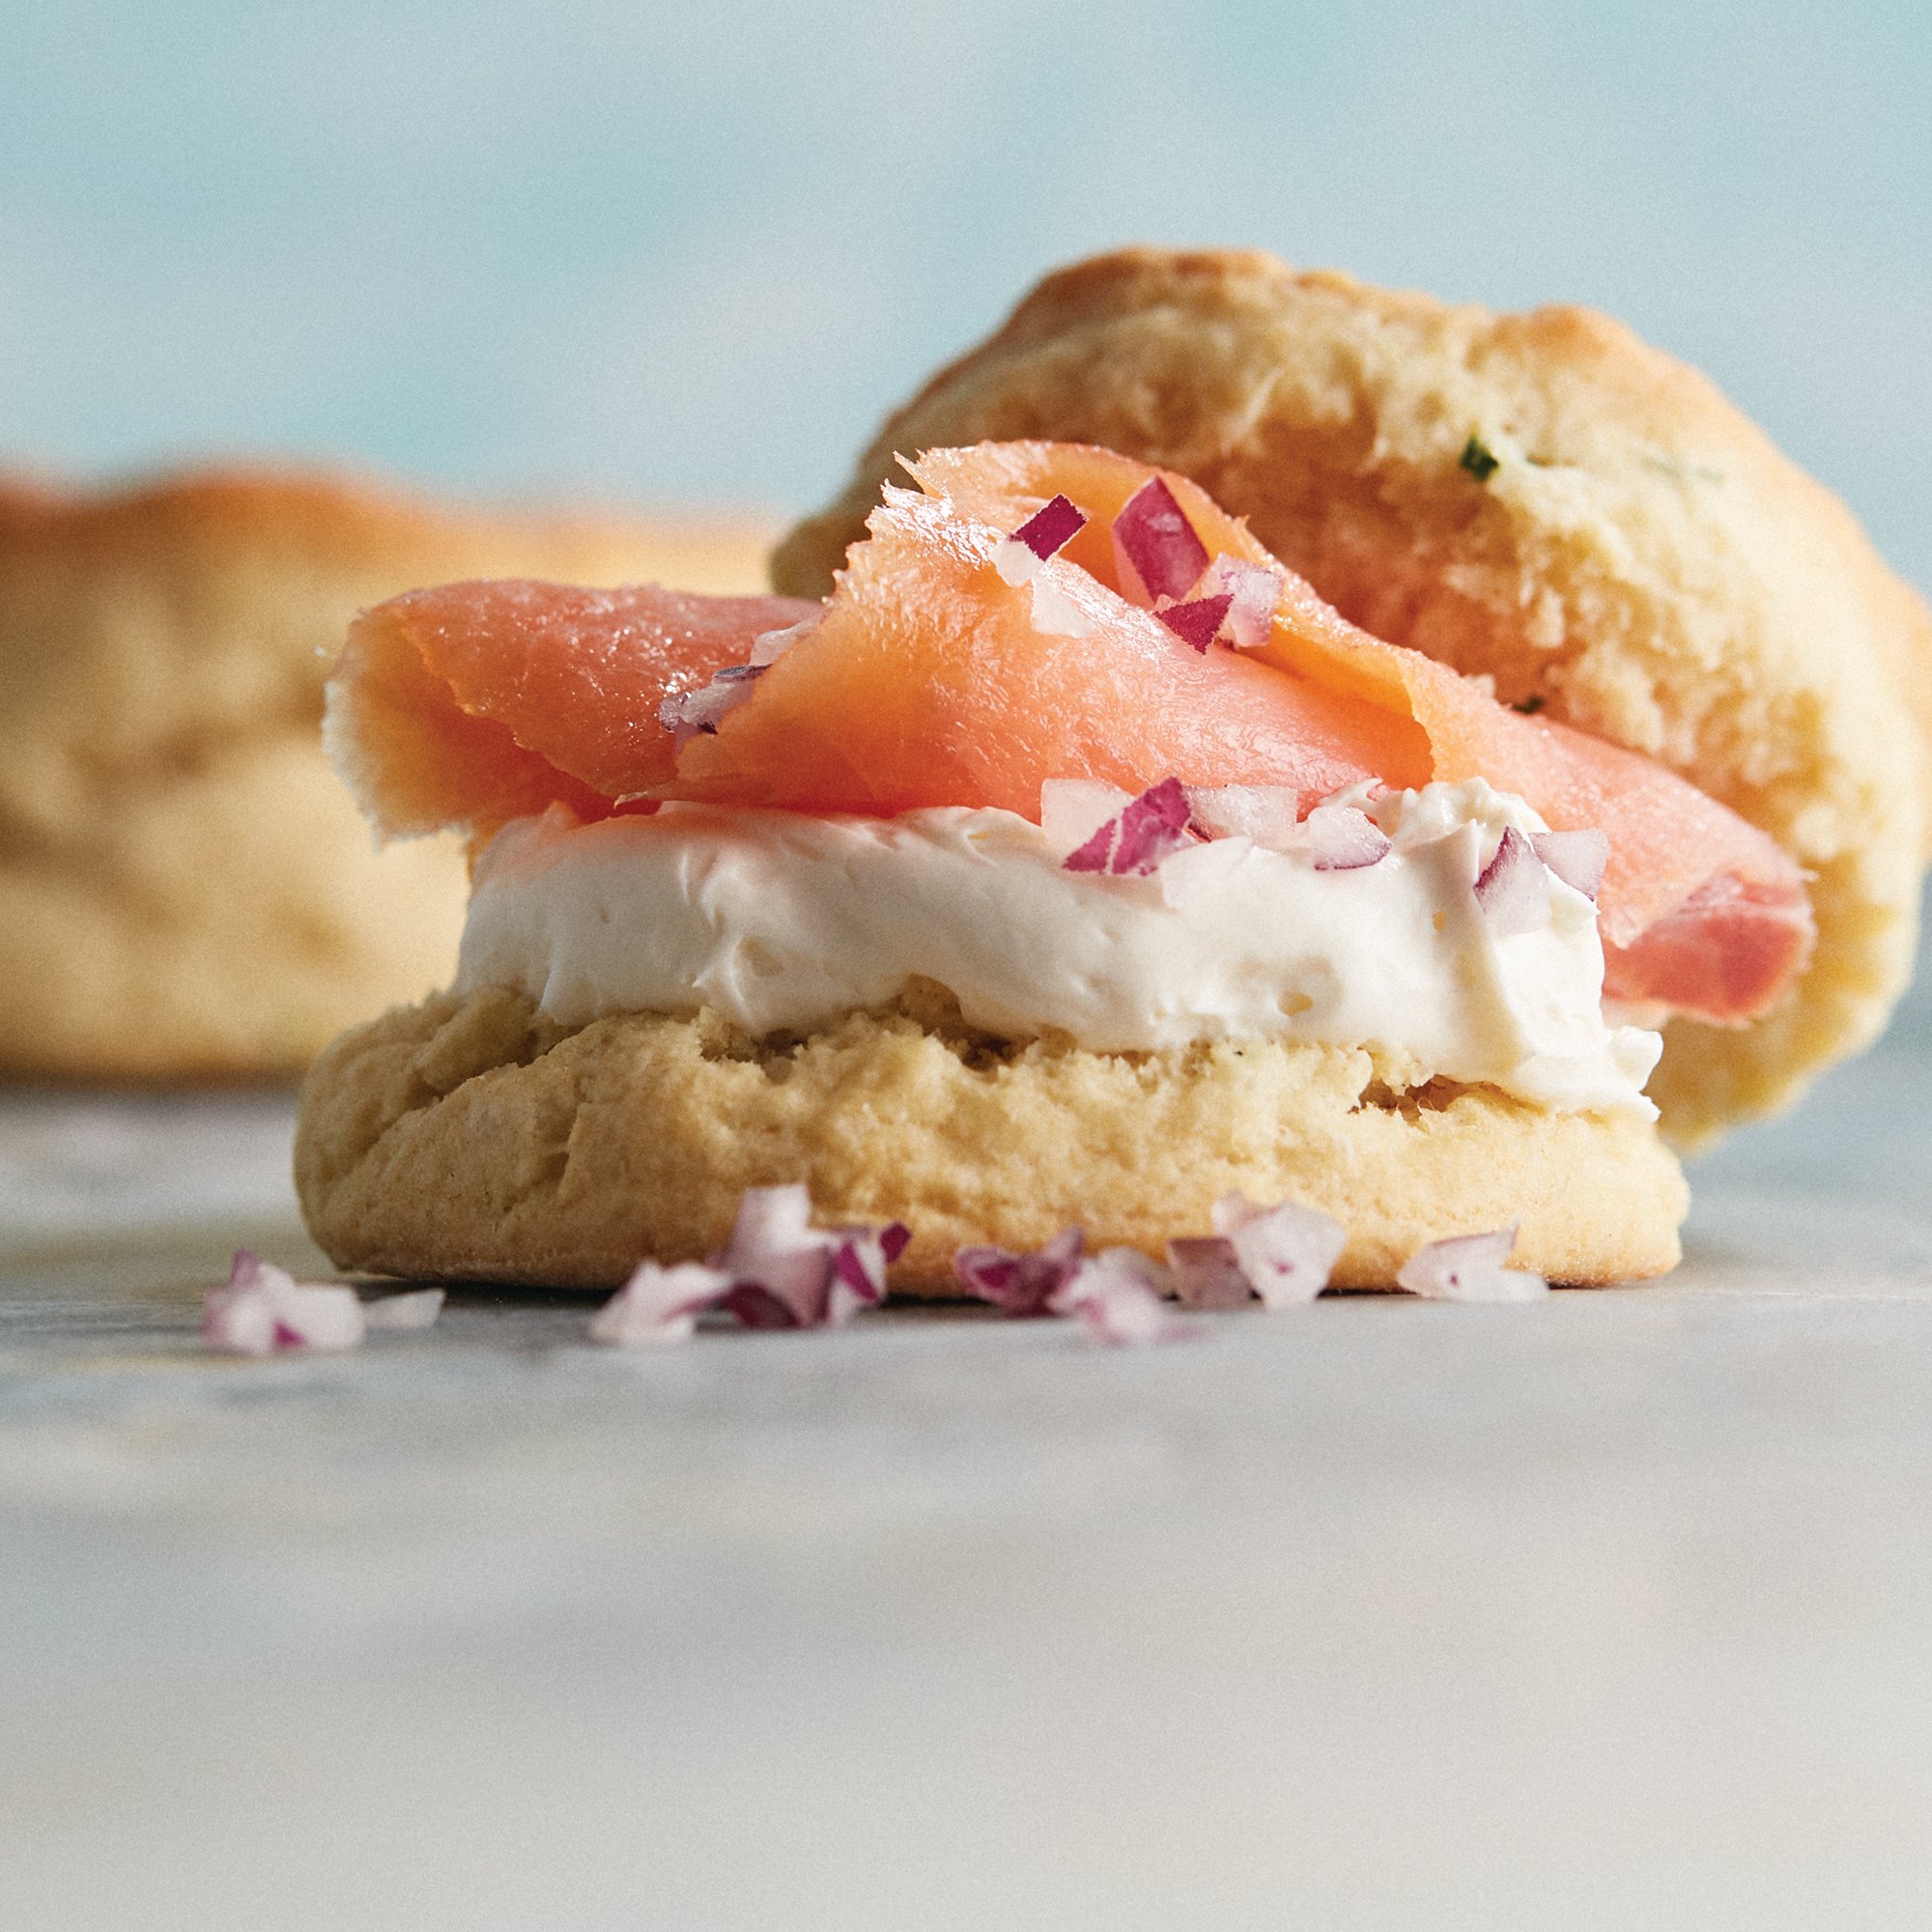 https://images.heb.com/is/image/HEBGrocery/recipe-hm-large/smoked-salmon-with-cream-cheese-chive-biscuits-recipe.jpg